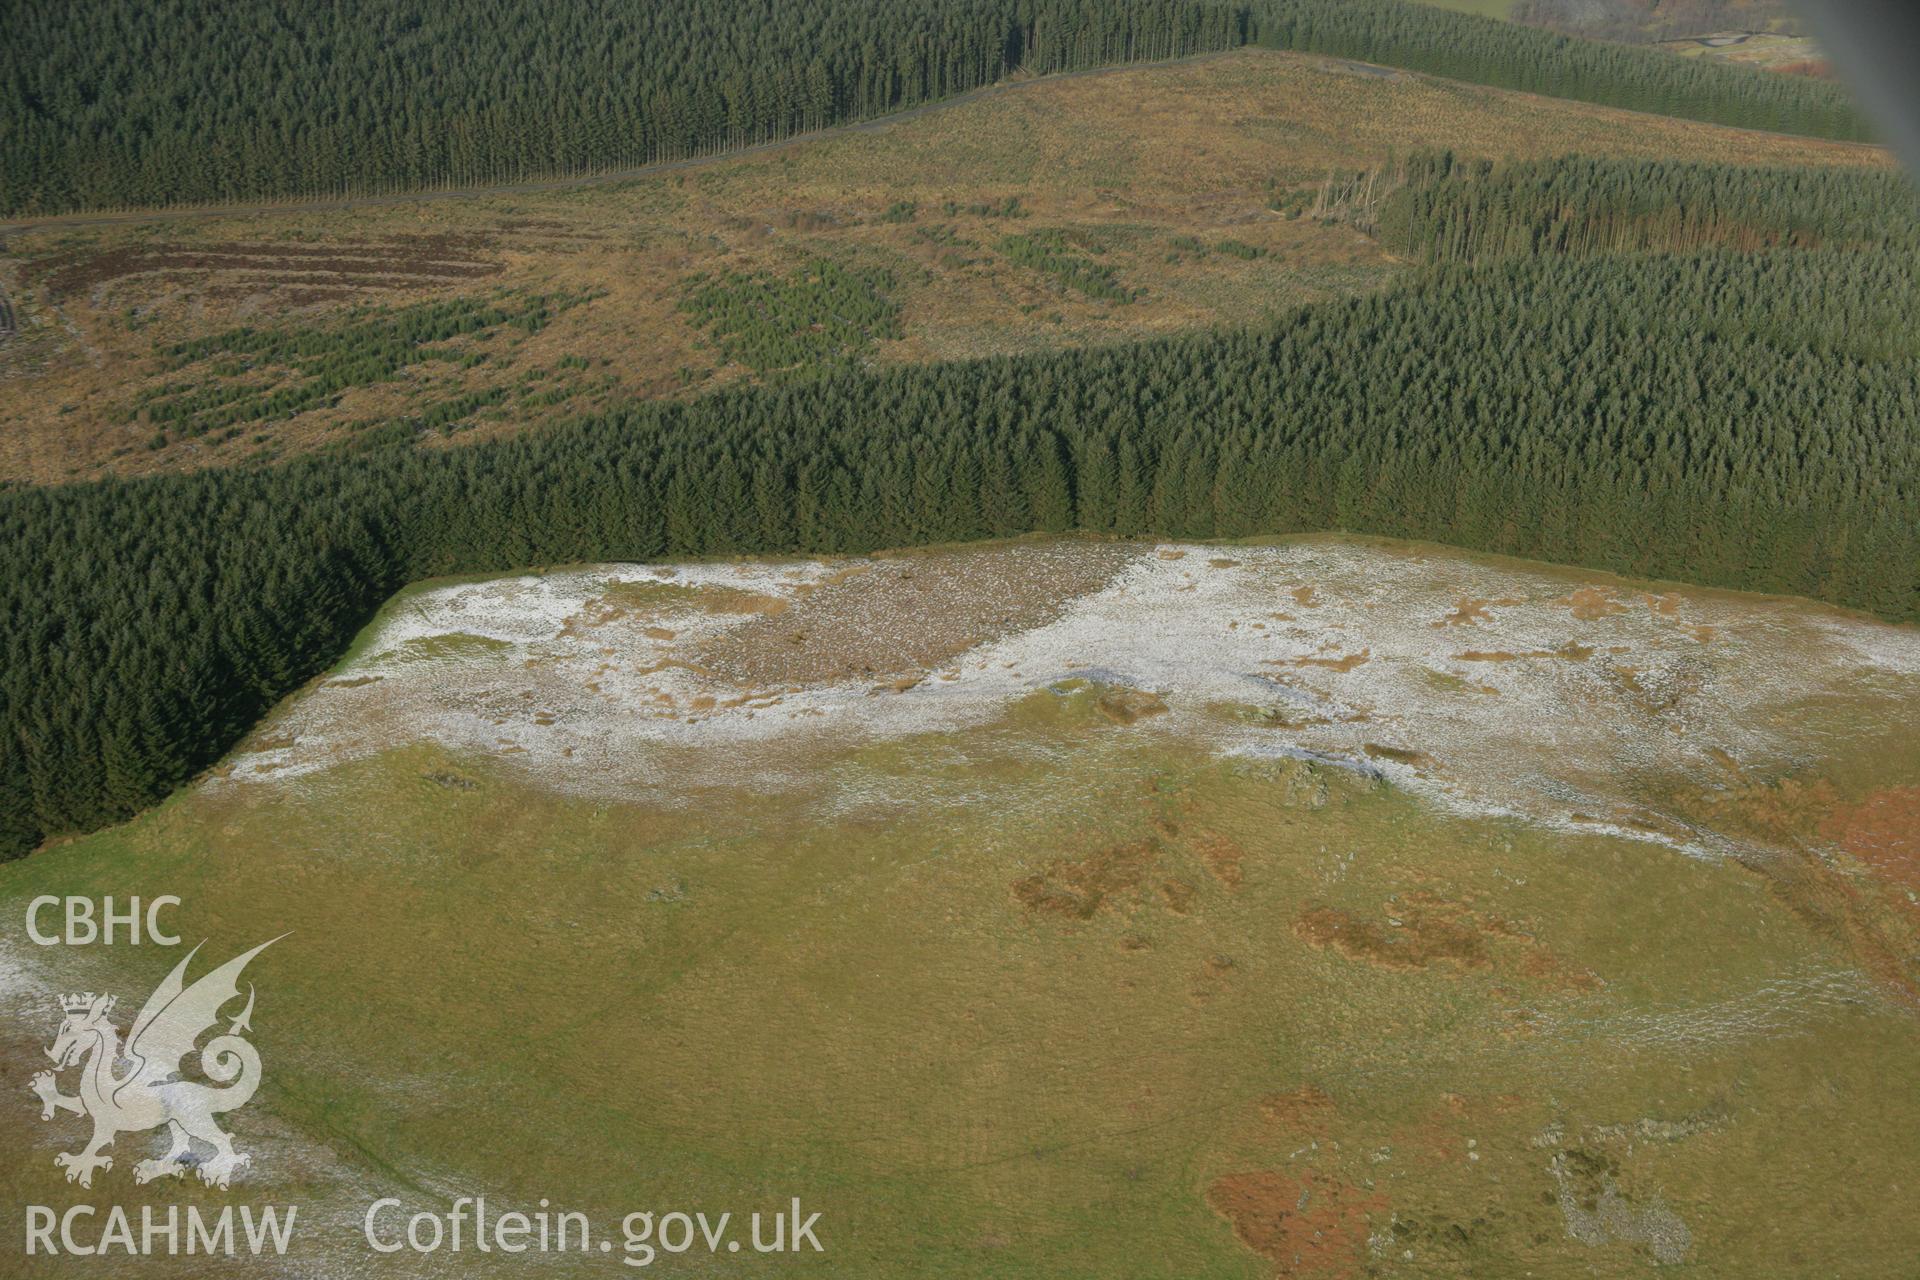 RCAHMW colour oblique aerial photograph of Carnedd Das Eithin. Taken on 25 January 2007 by Toby Driver